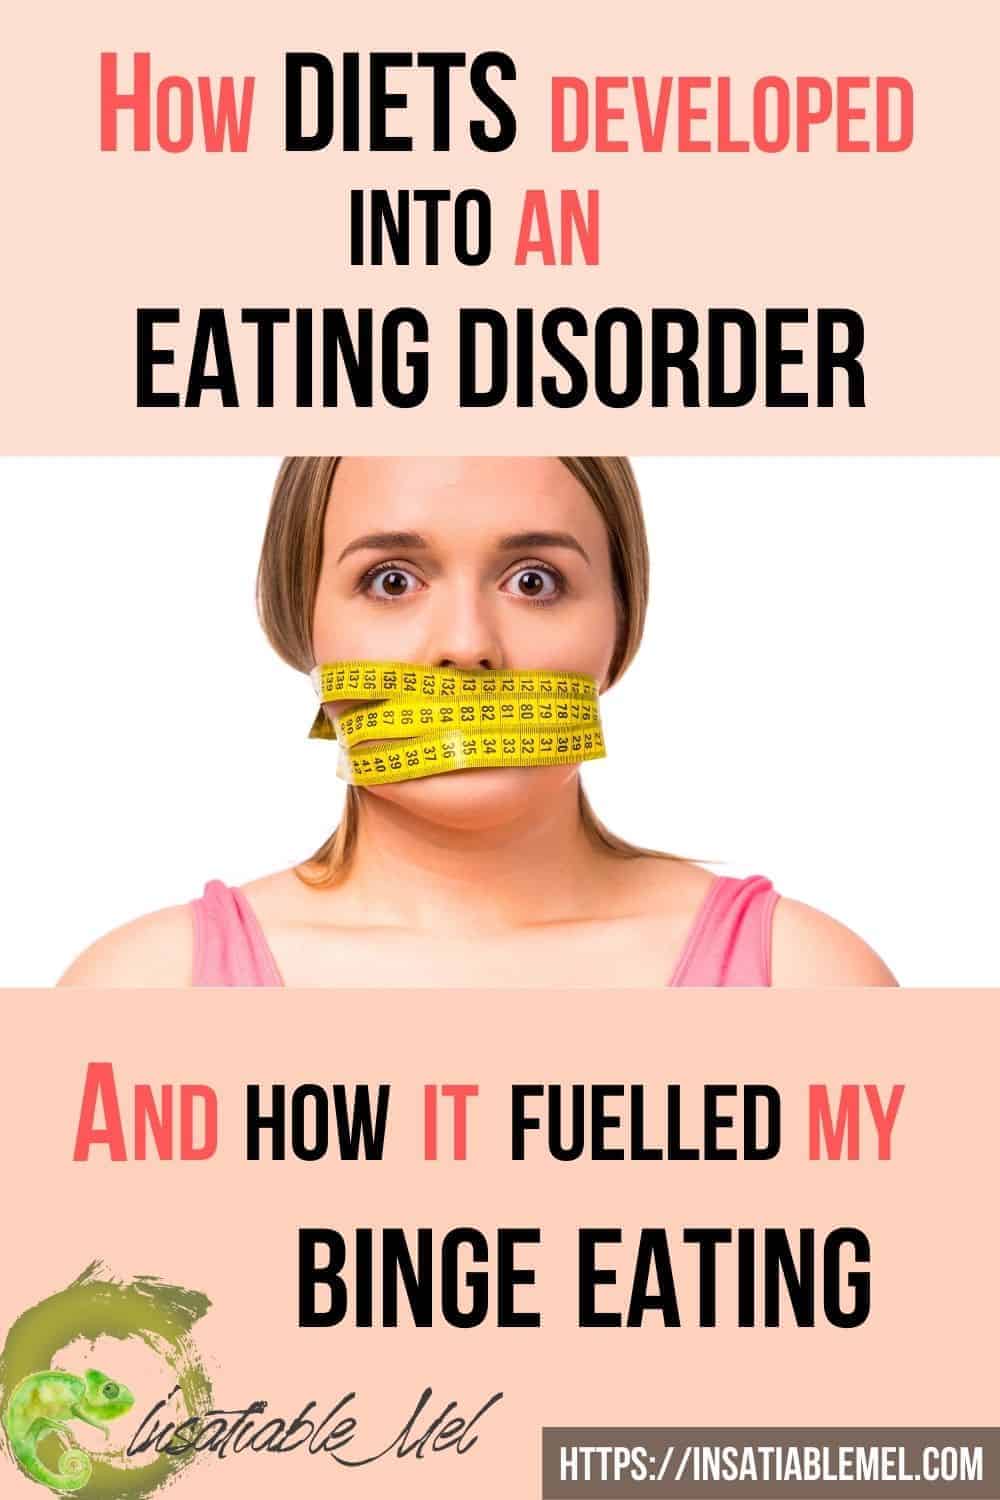 How diets developed into an eating disorder #insatiablemel #bingeeating #rapidtransformationaltherapy #hypnotherapy